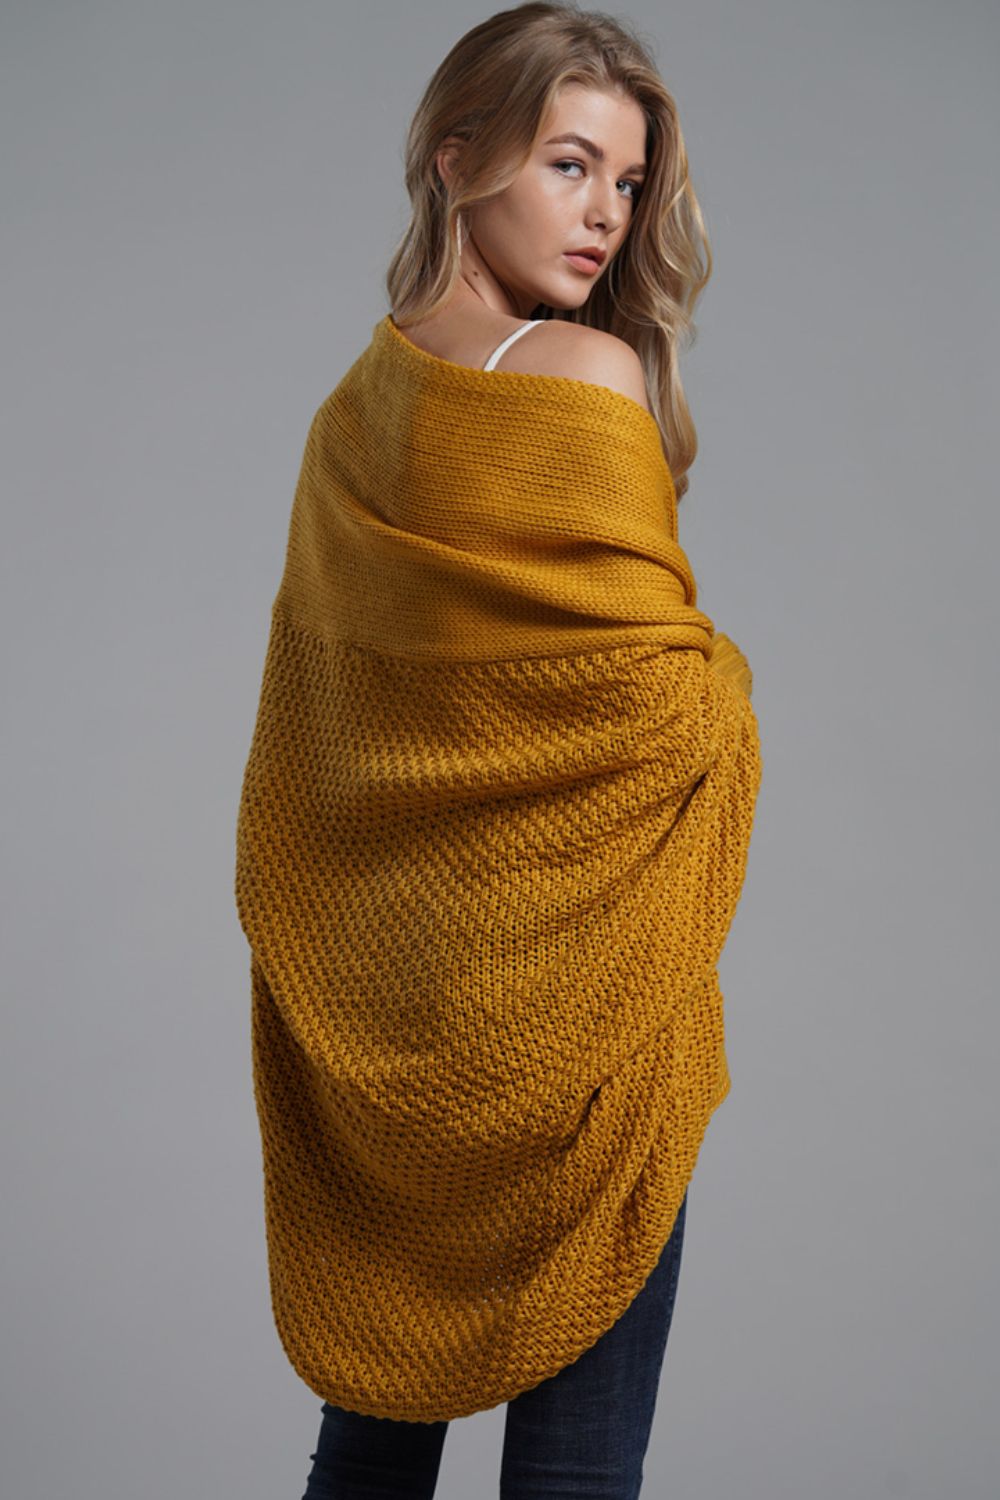 Women's Cardigan with Dolman Sleeves yellow